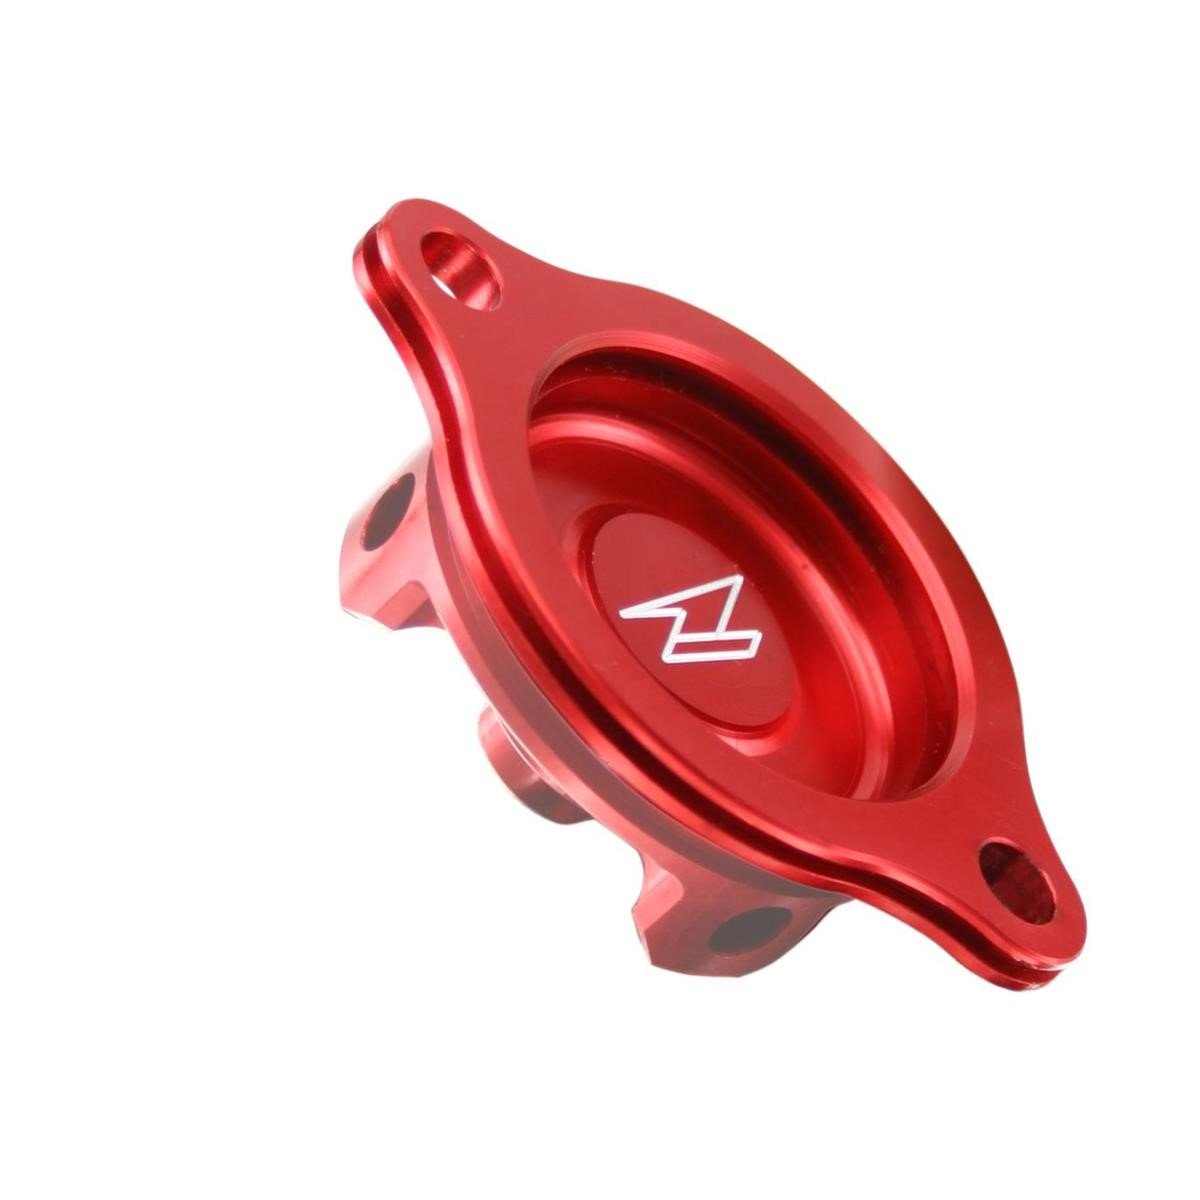 Zeta Oil Filter Cover  Red, Yamaha YZF250/450